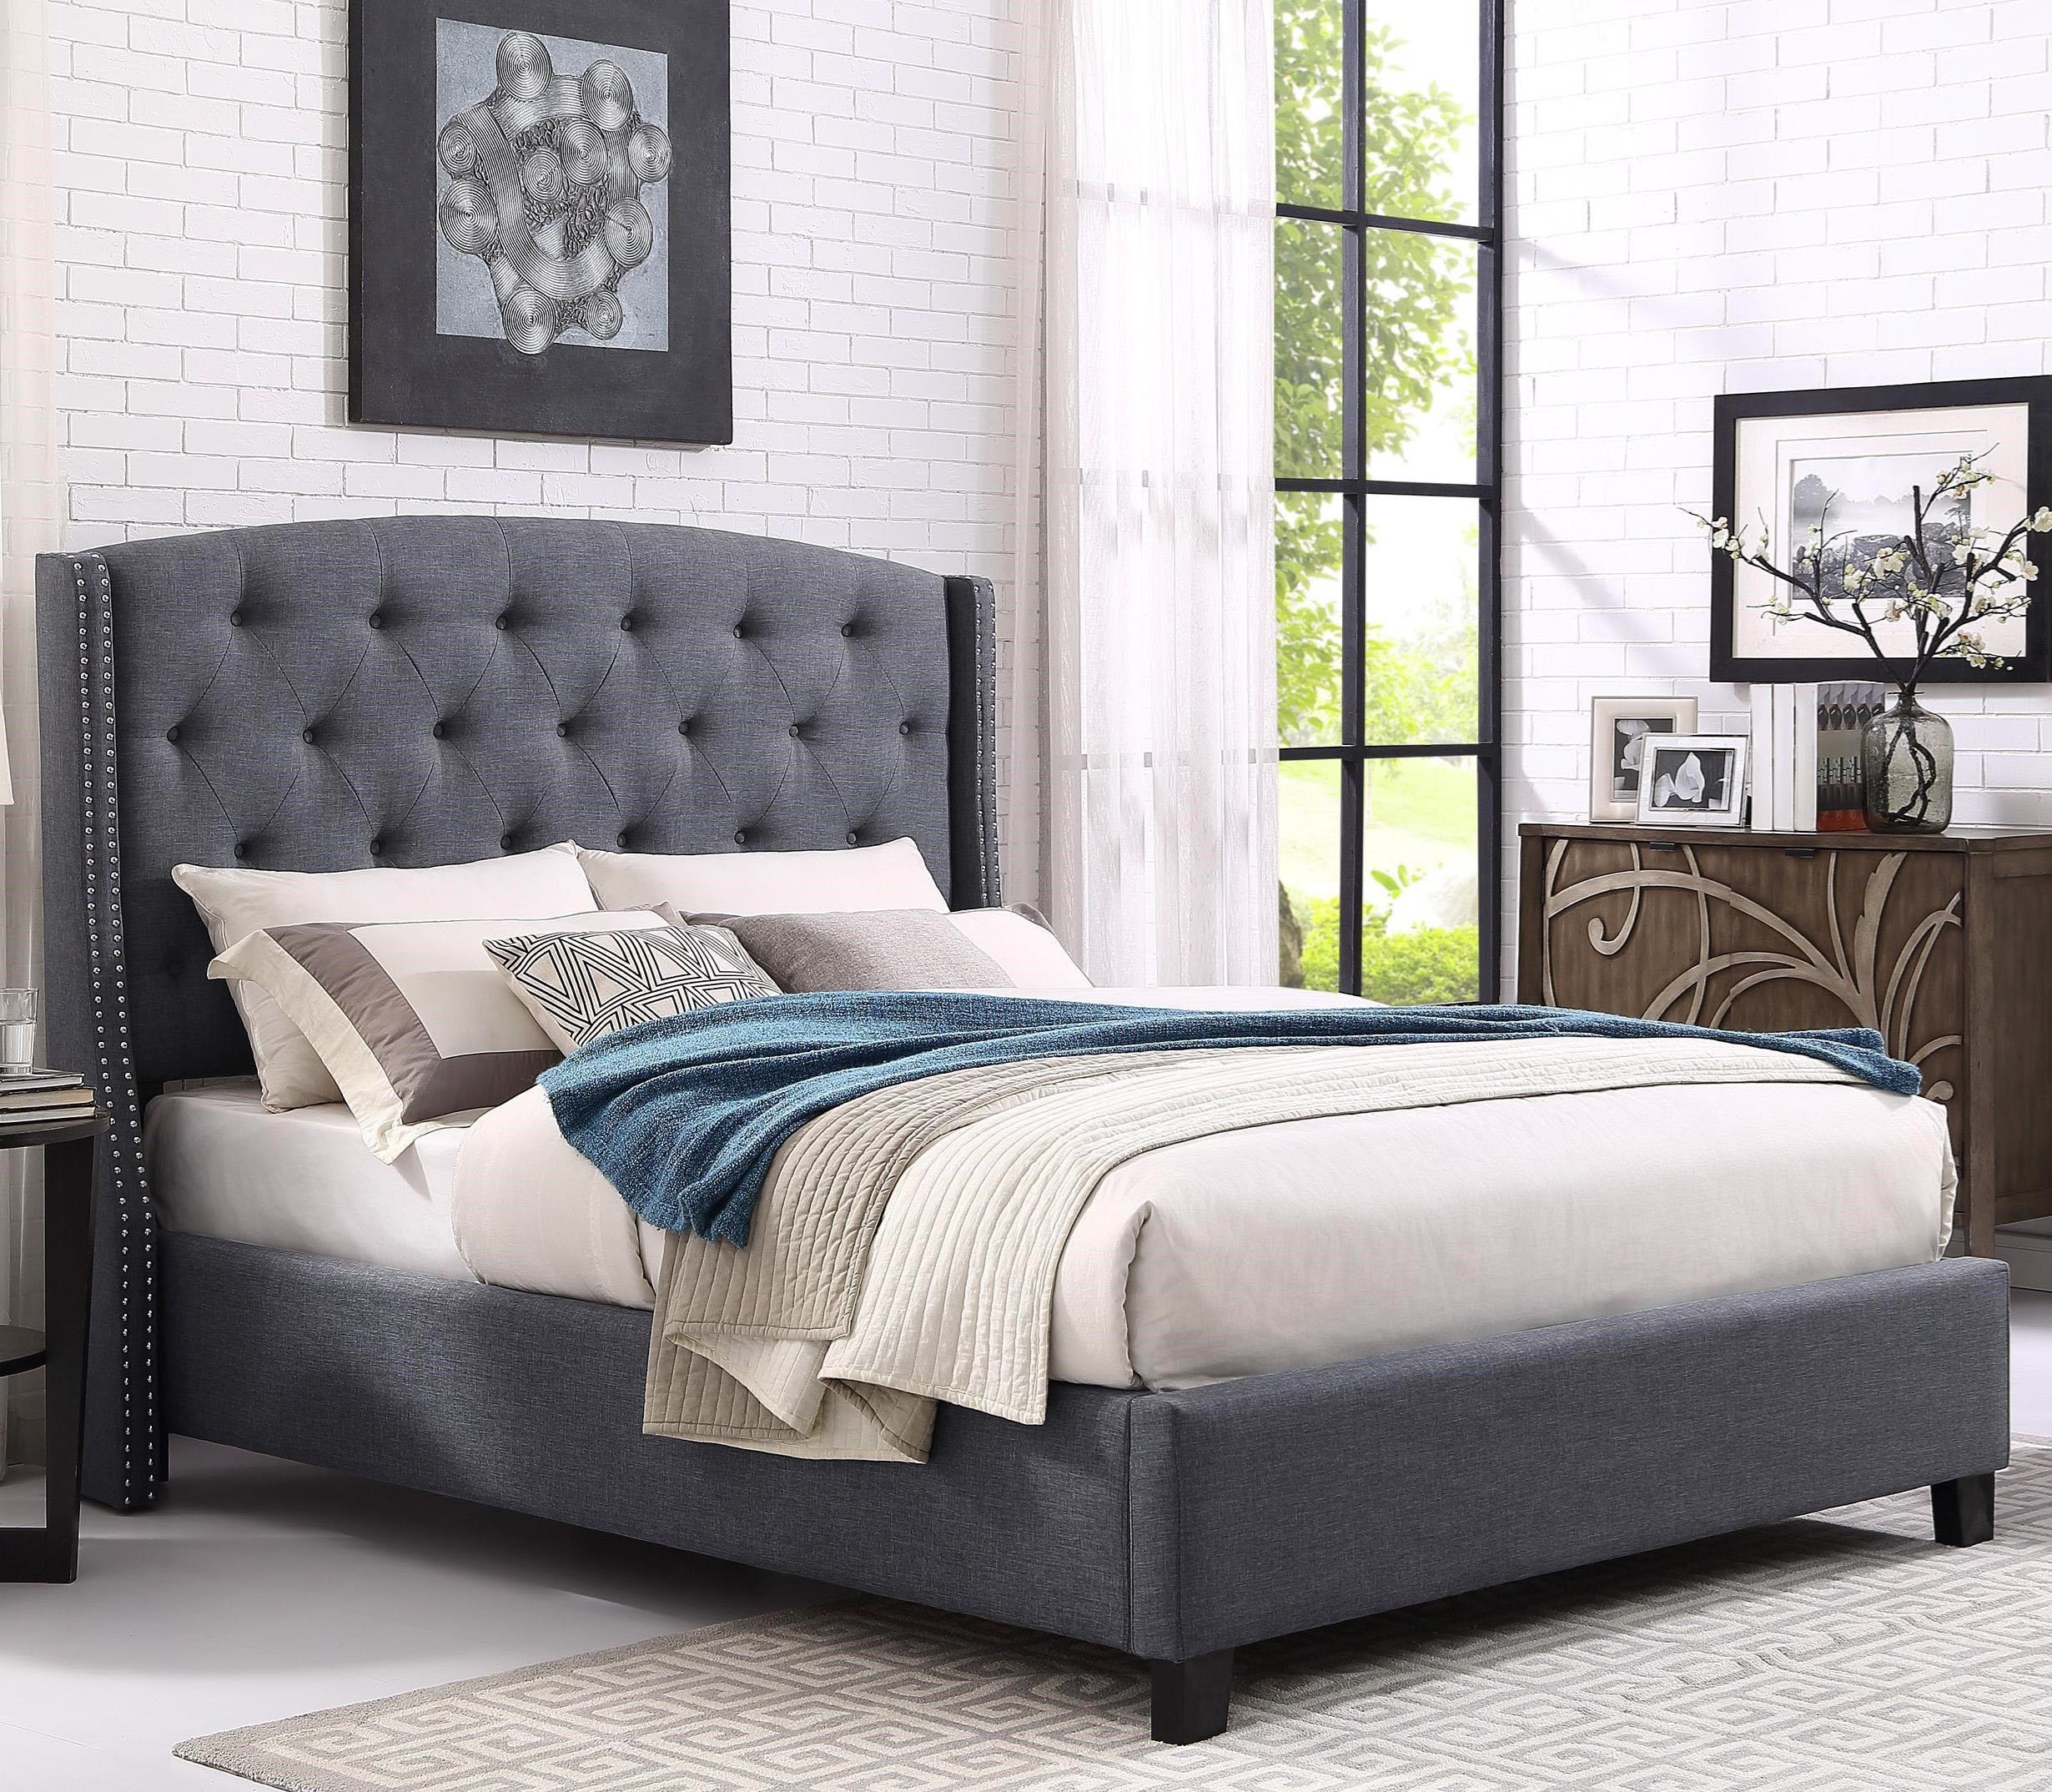 Contemporary Platform Bed Eva 5111 5111GY-Q-Bed in Gray Fabric